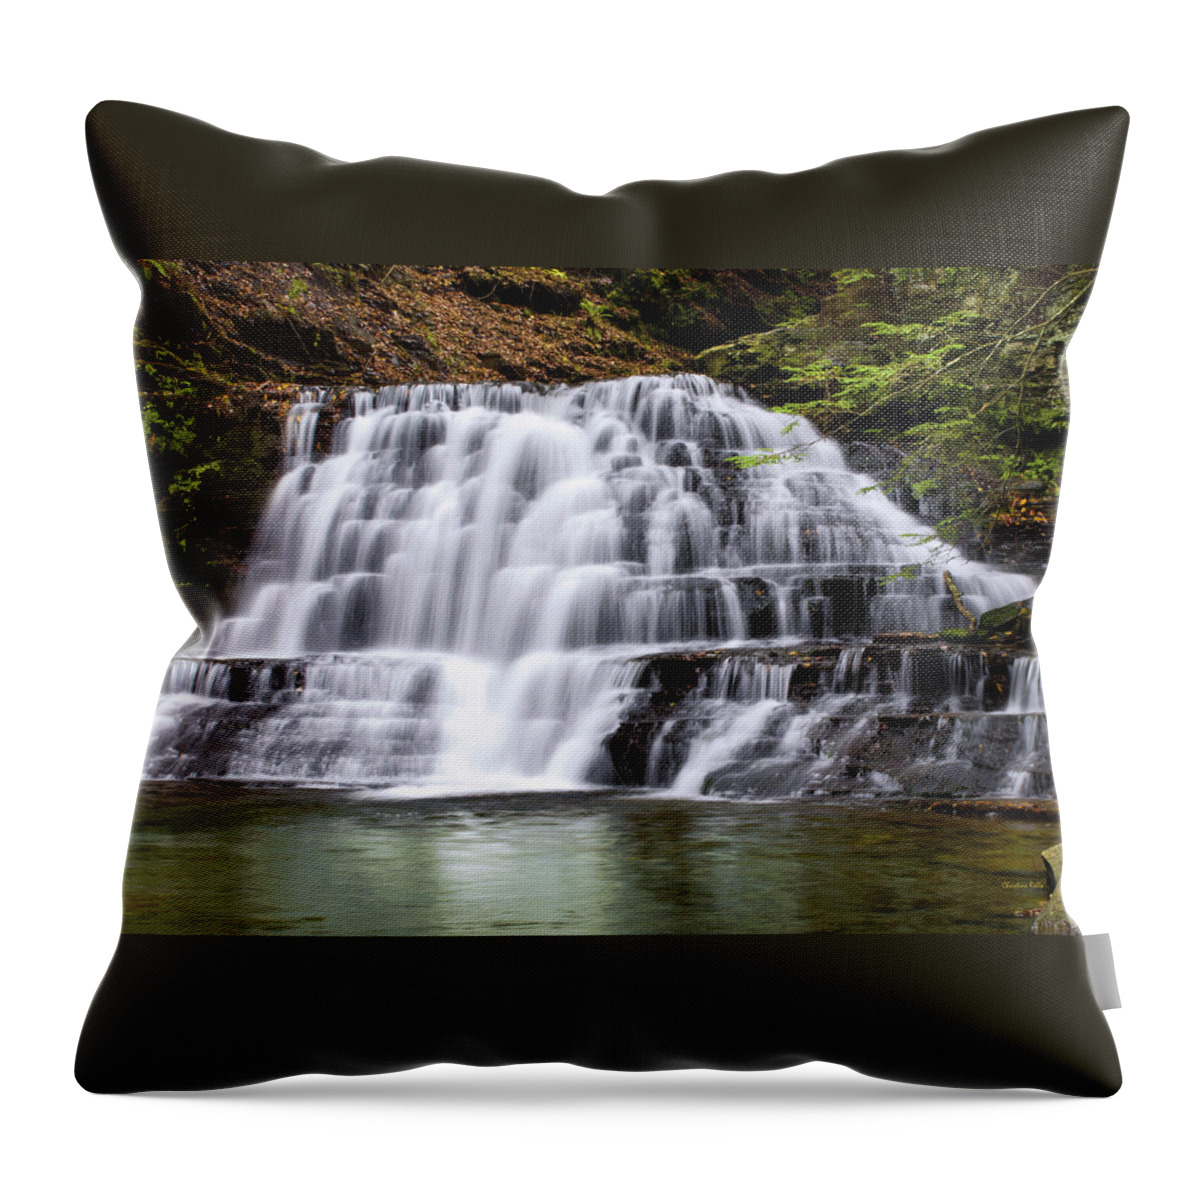 Waterfall Throw Pillow featuring the photograph Beautiful Waterfall by Christina Rollo